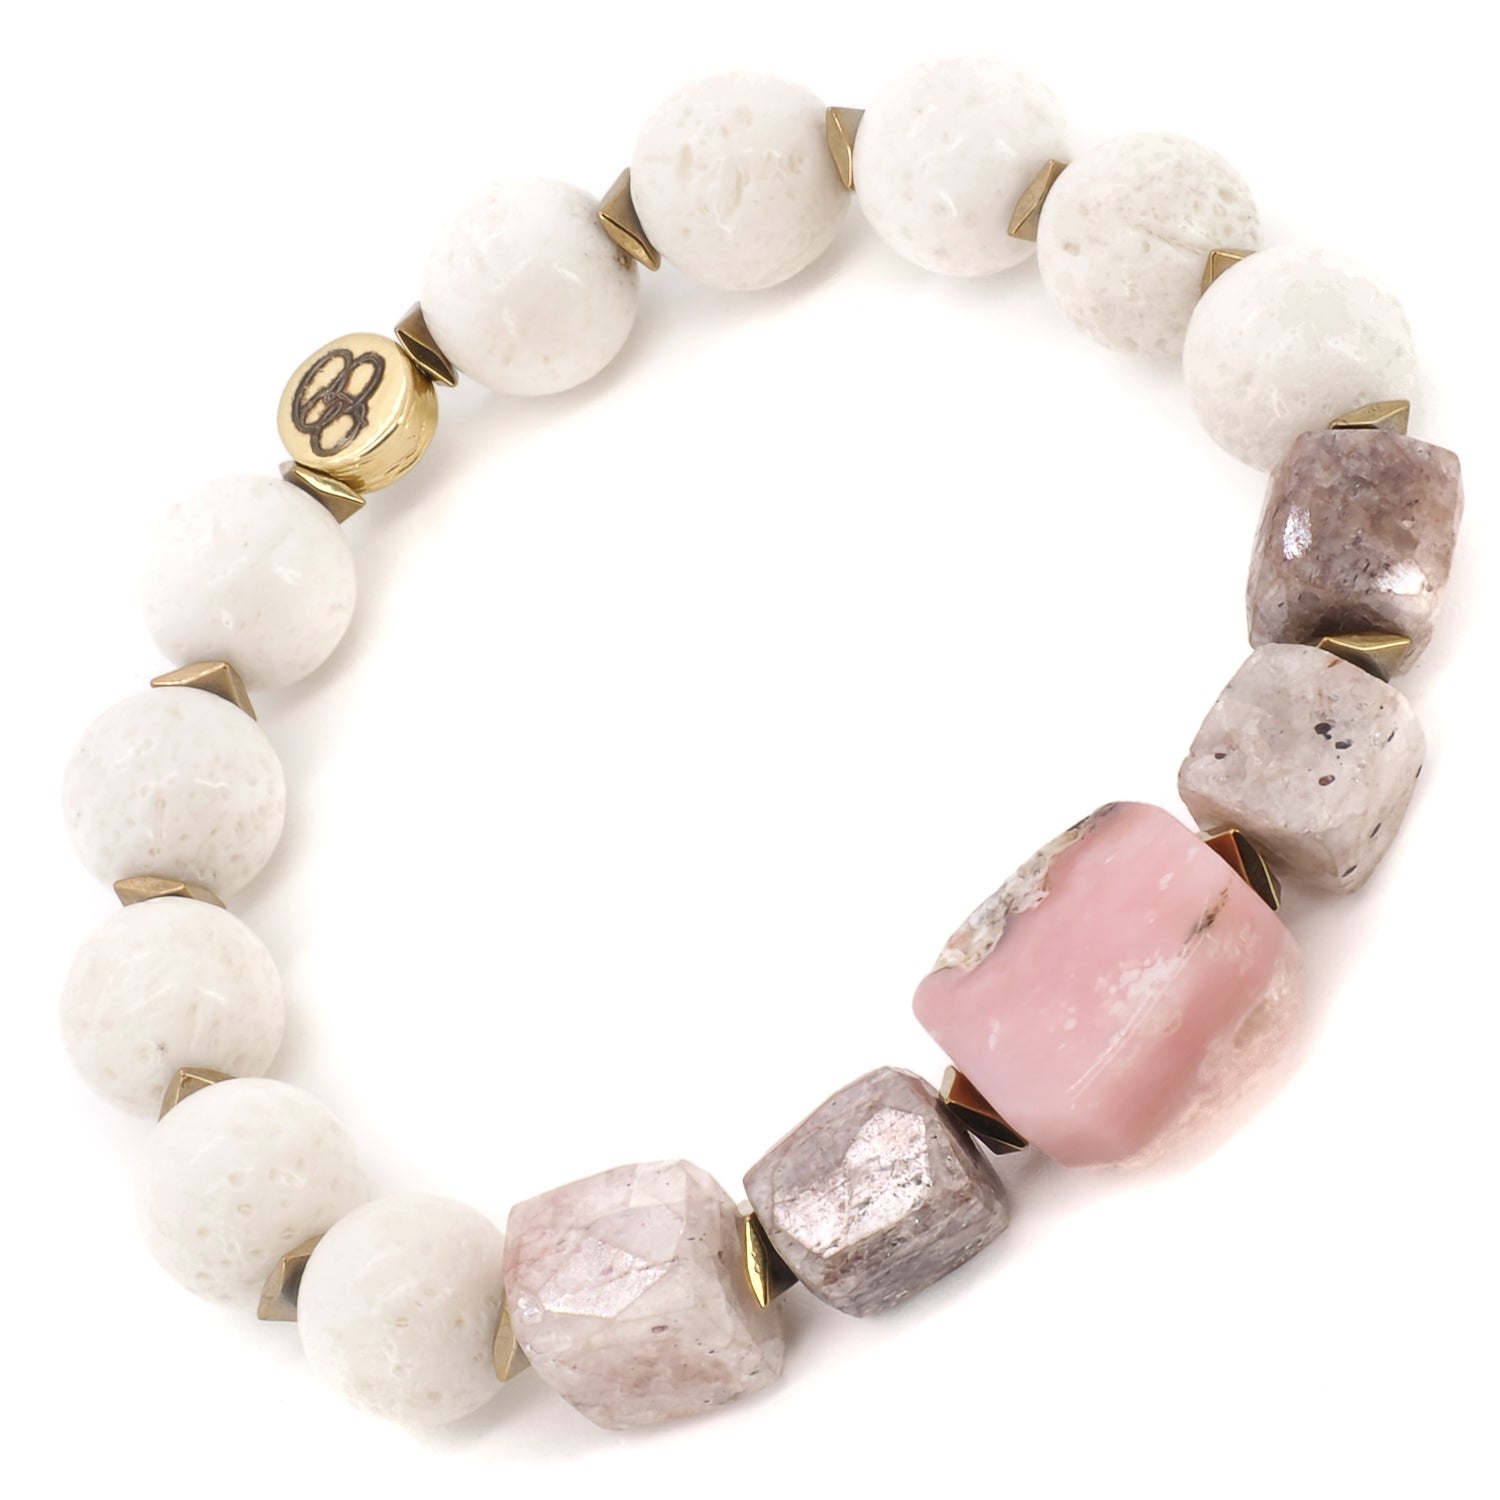 Adorn your wrist with the Pink Quartz Balance Bracelet, a handmade piece designed to bring love and light to your life.